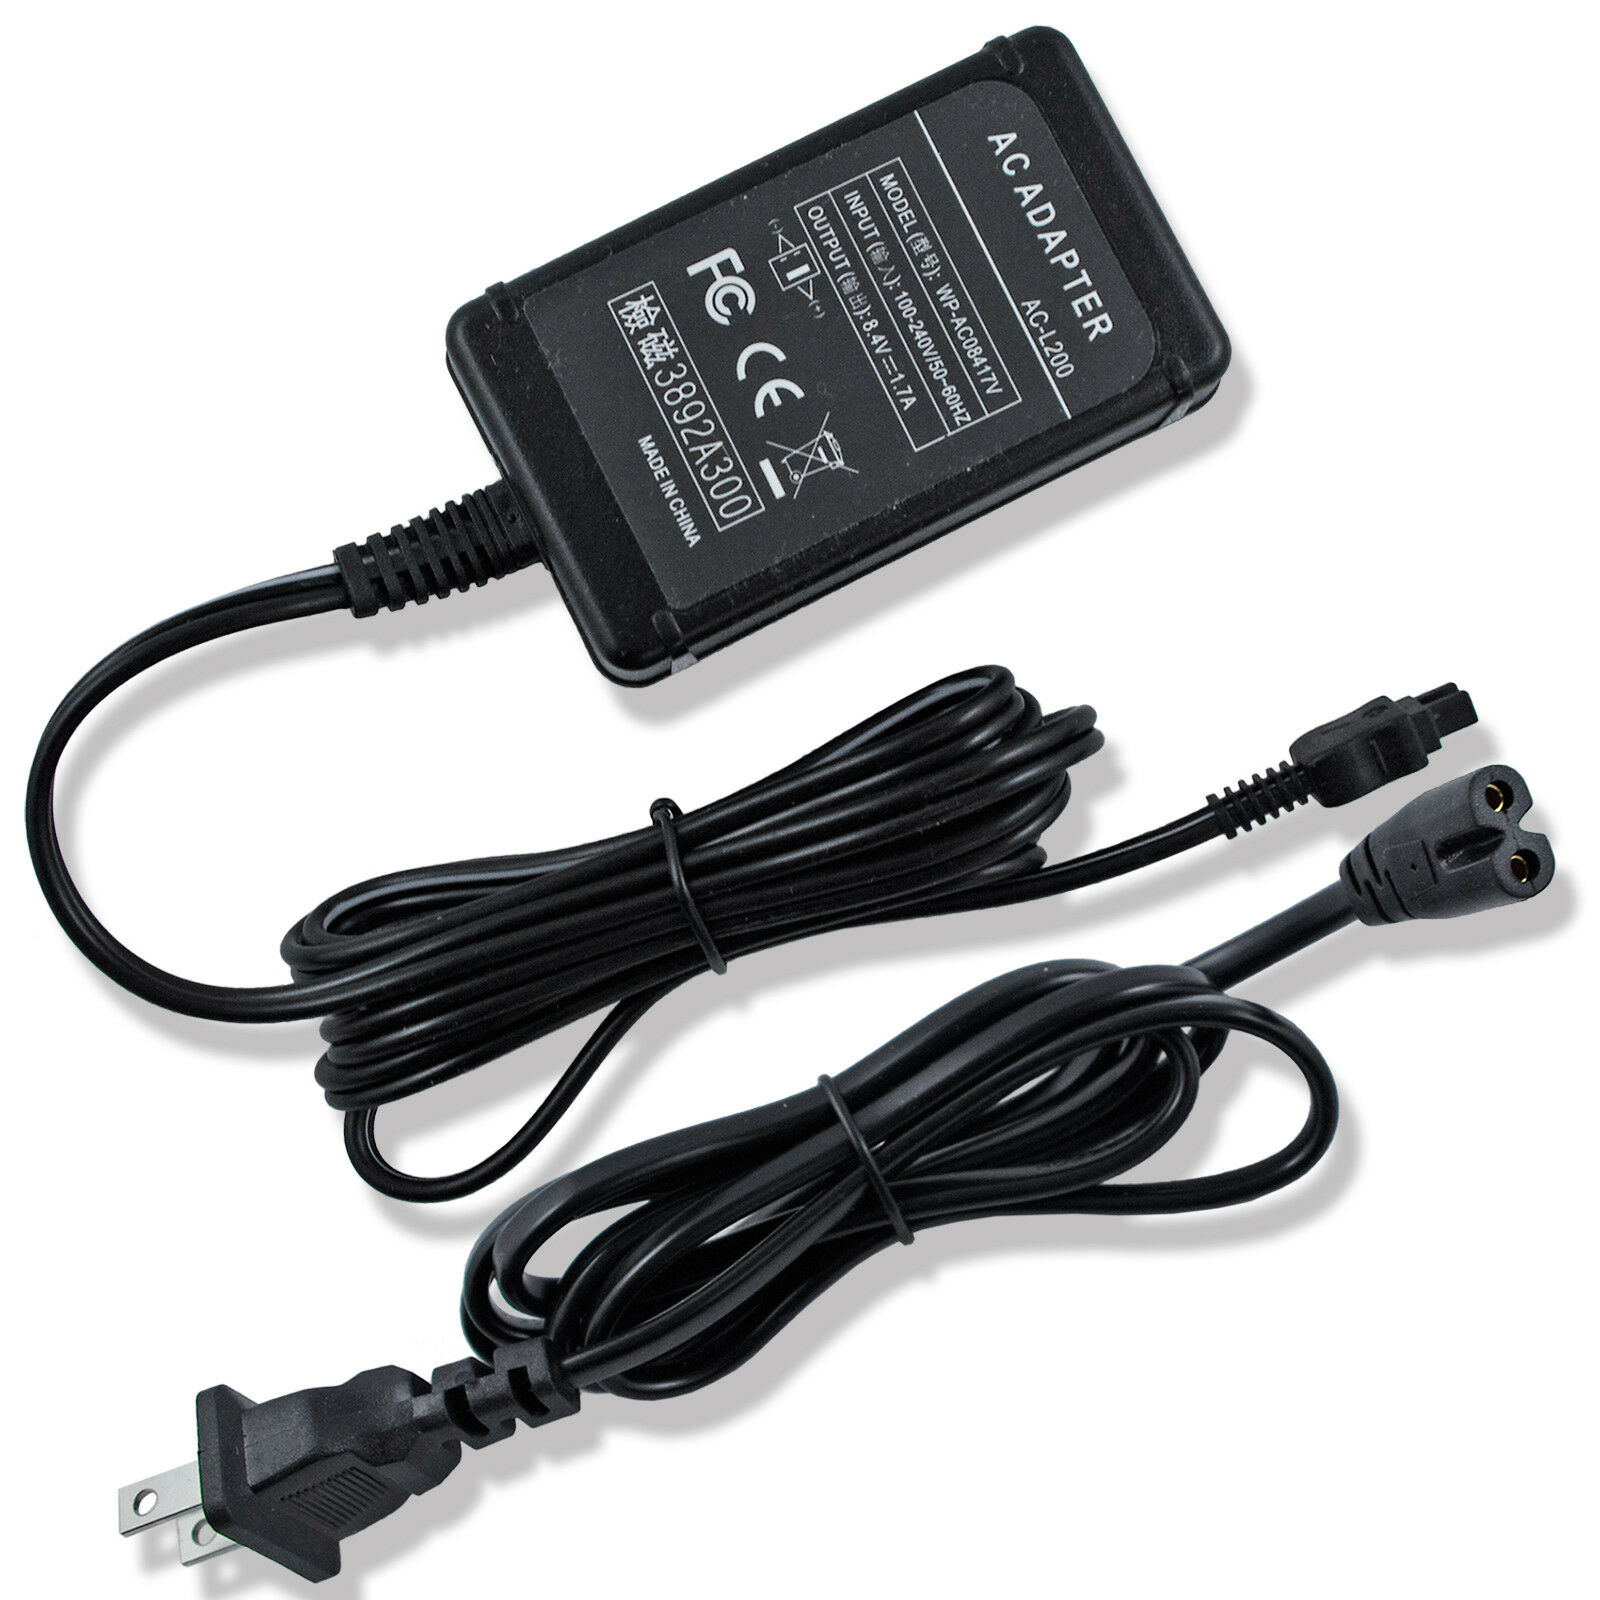 CBK AC Adapter Charger Power Supply for Sony DCR-HC19E DCR-HC28 DCR-HC24E DCR-HC38 DCR-DVD8 DCR-HC30 DCR-HC32 DCR-HC20 DCR-HC21 DCR-HC85 DCR-HE85E DCR-HC90 DCR-HC90E DCR-HC94 AC-200D AC-200B 